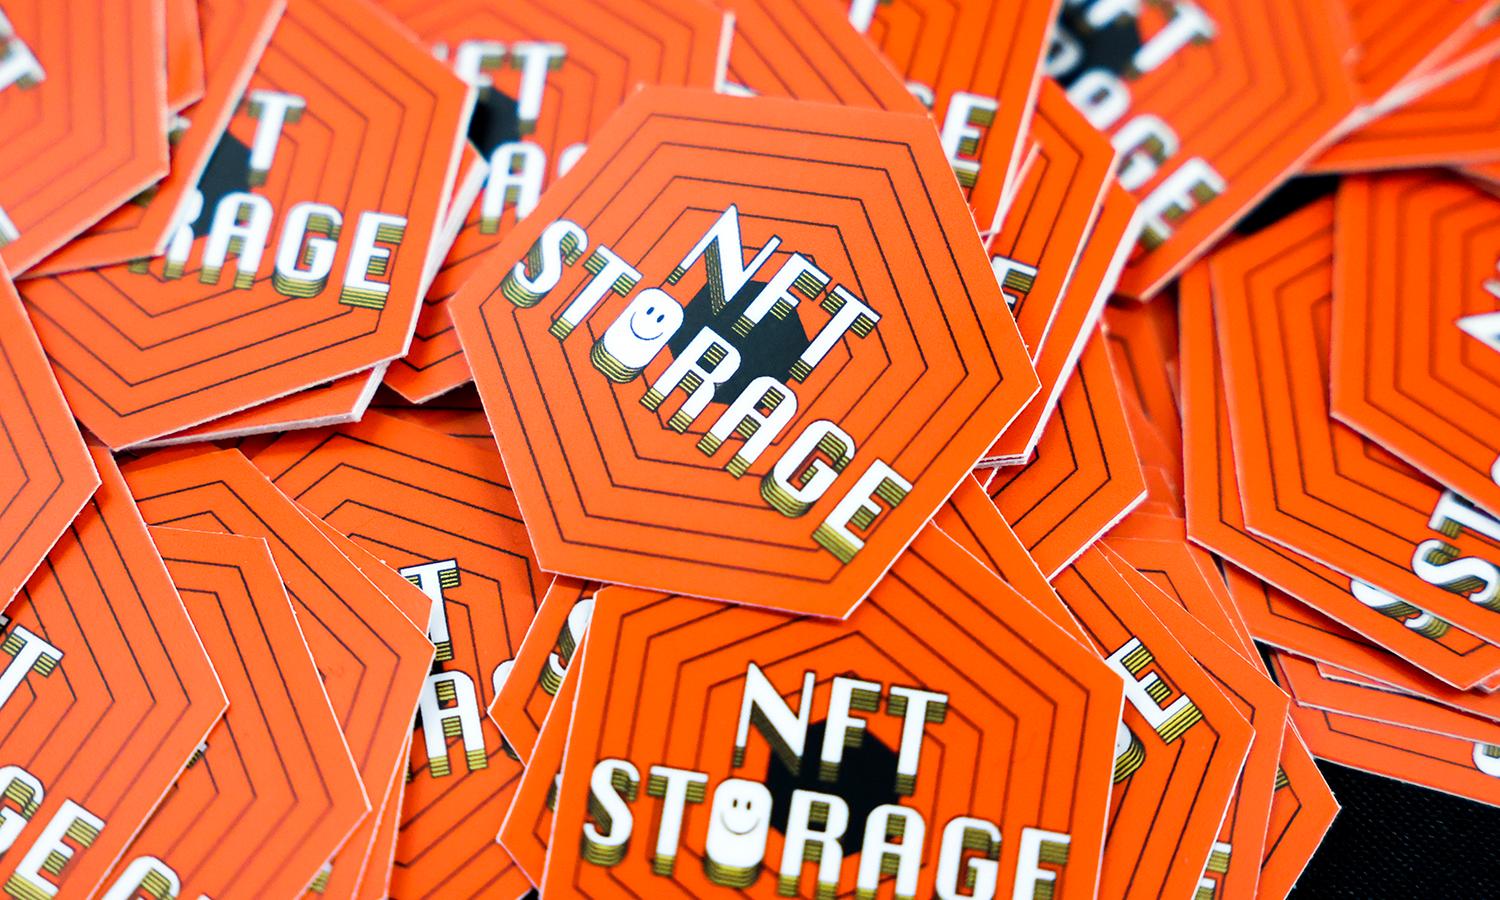 Orange stickers with the words "NFT storage" written in white sit in a pile.